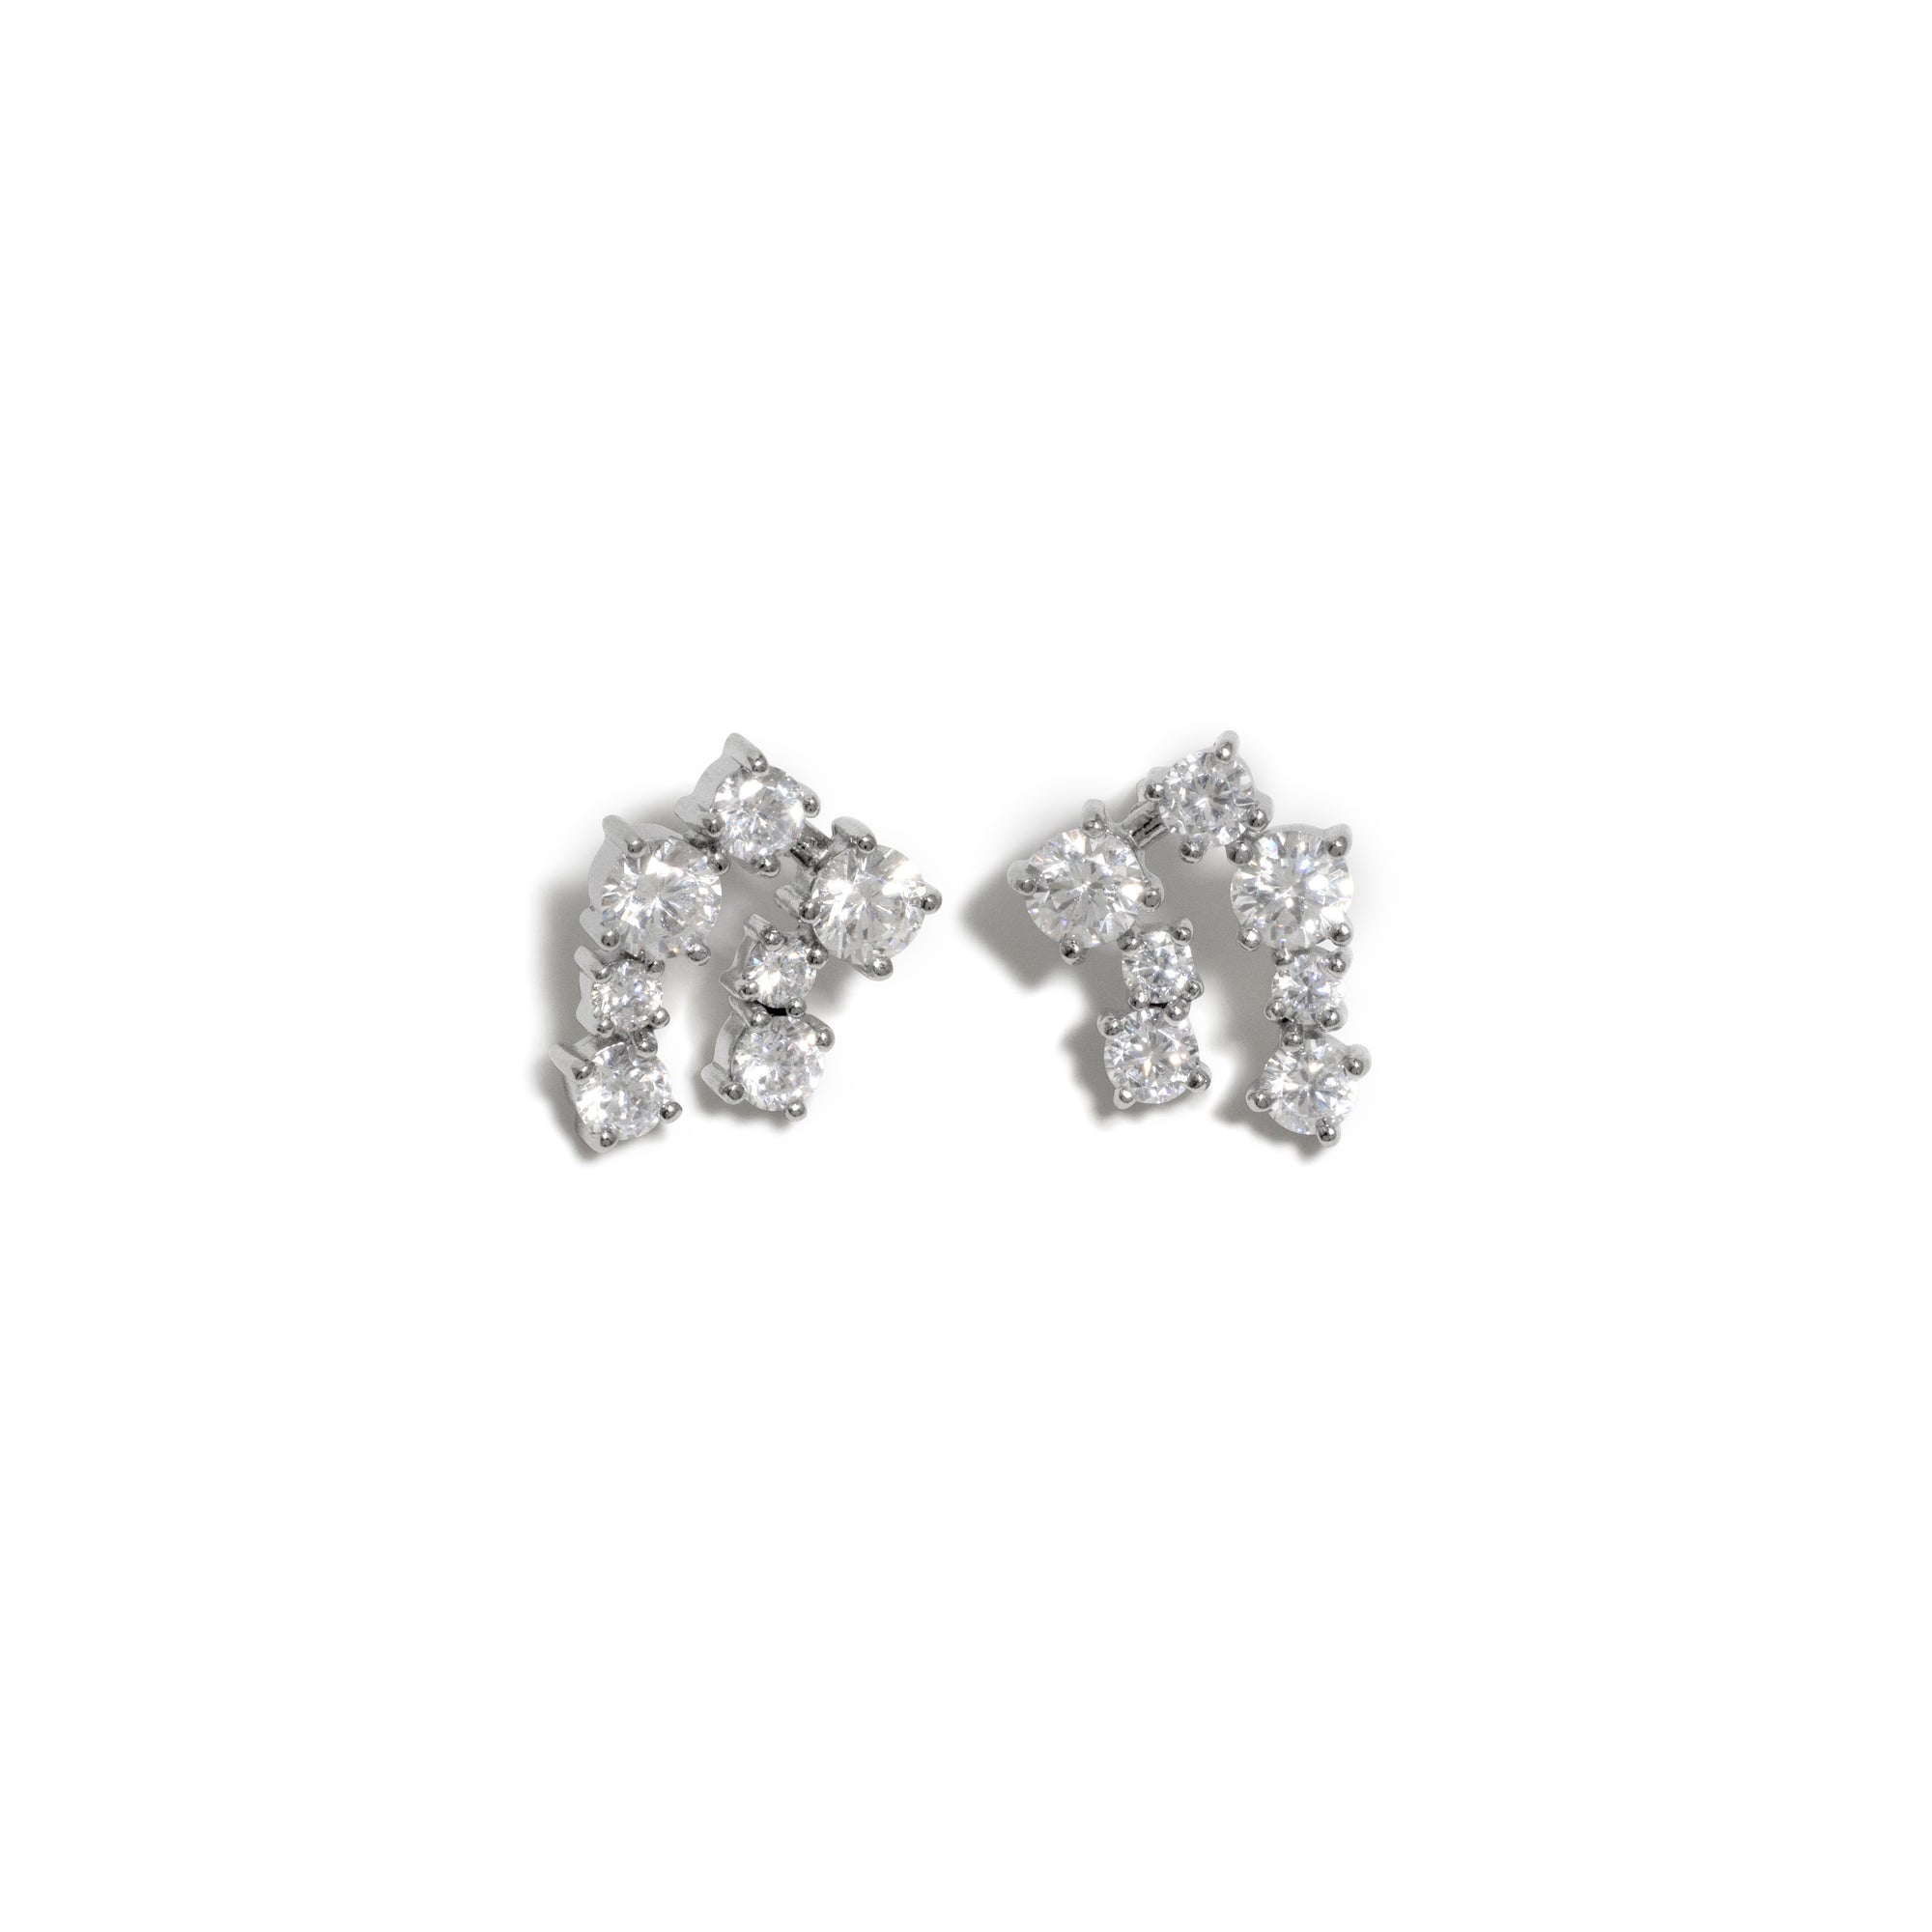 Completedworks - Meteor Shower Earrings - (Silver) view 1